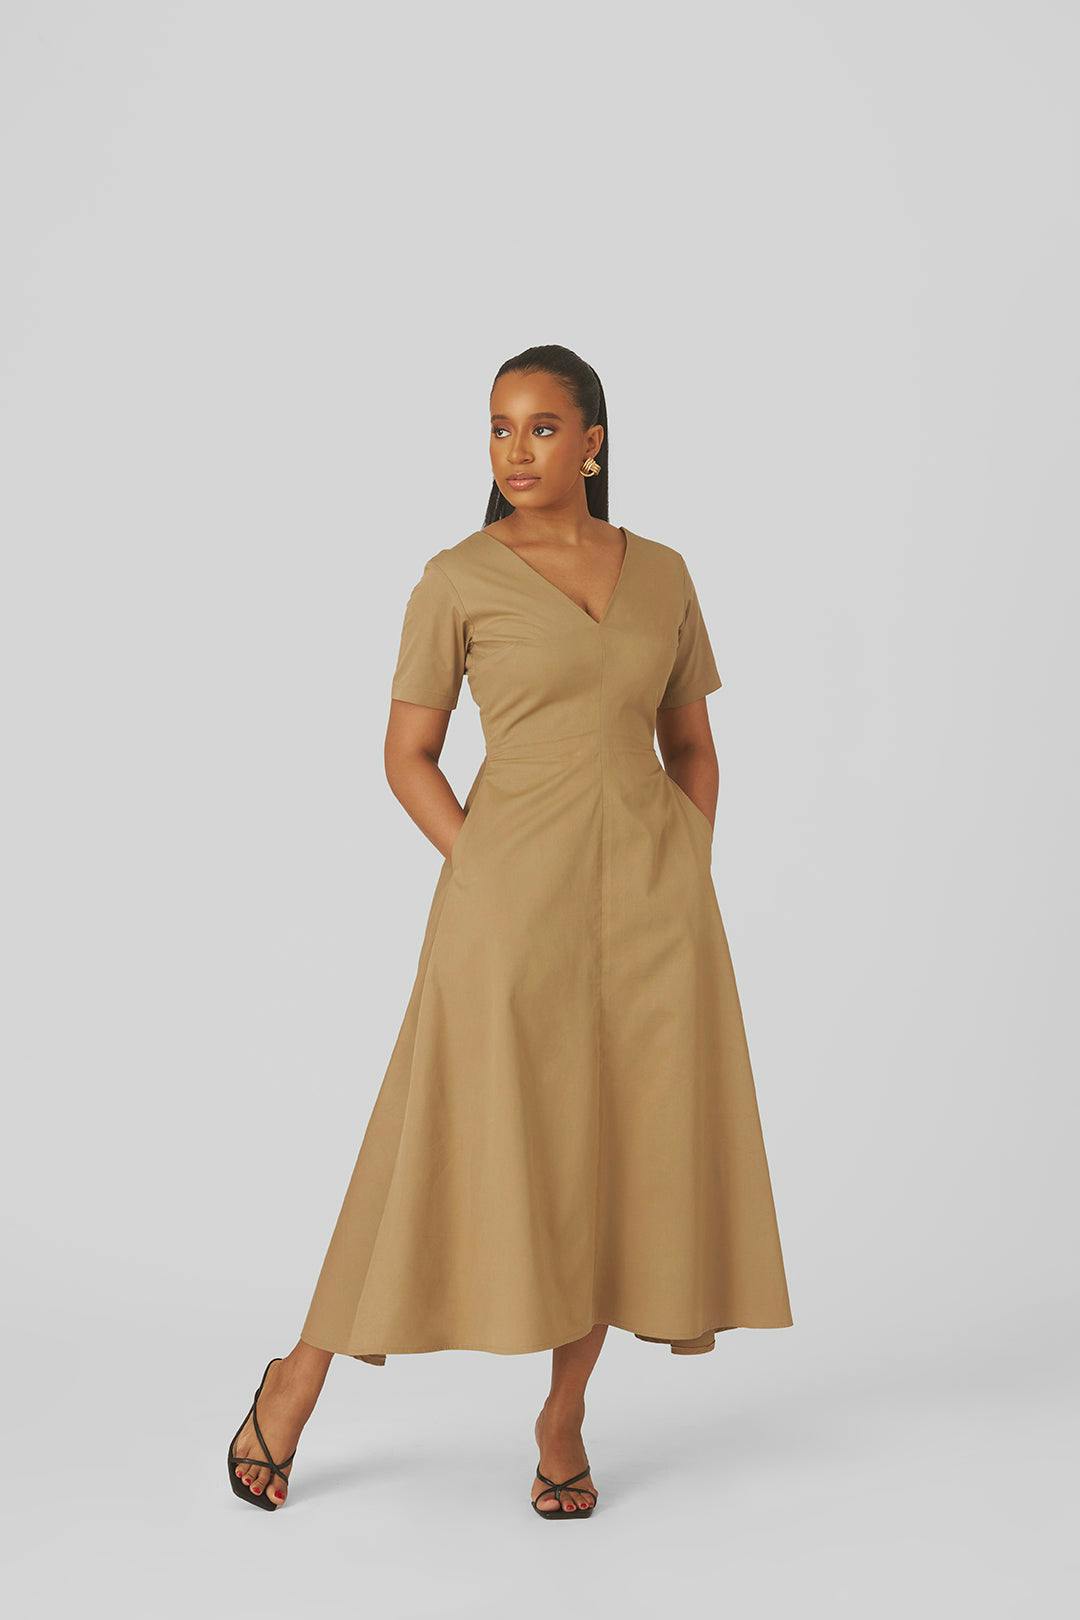 Amira Dress, a product by M.O.T the Label